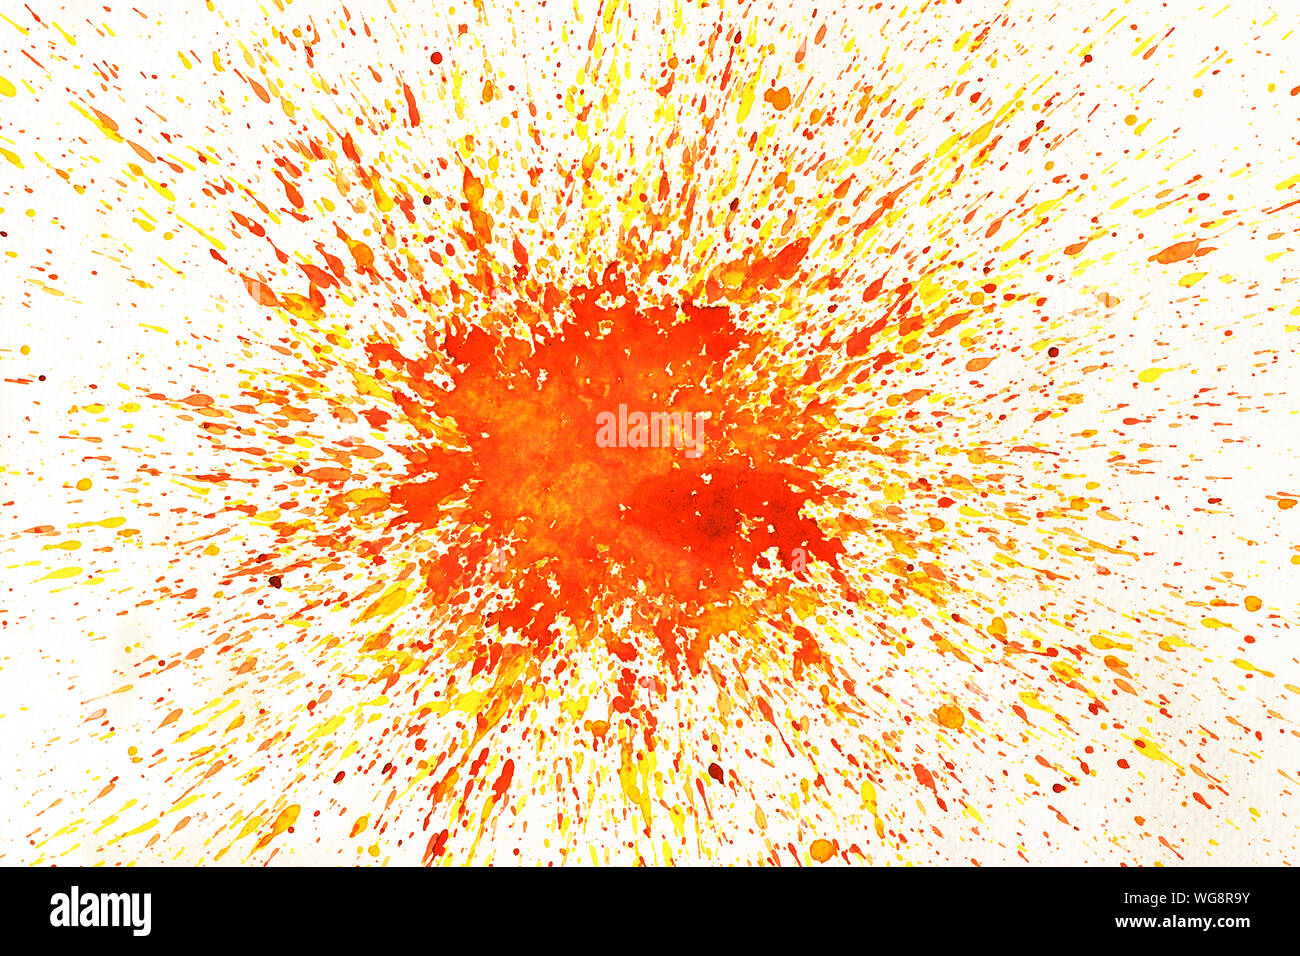 Watery spreading and splashing of red with yellow and orange colored on  white background , Illustration abstract watercolor hand draw Stock Photo -  Alamy